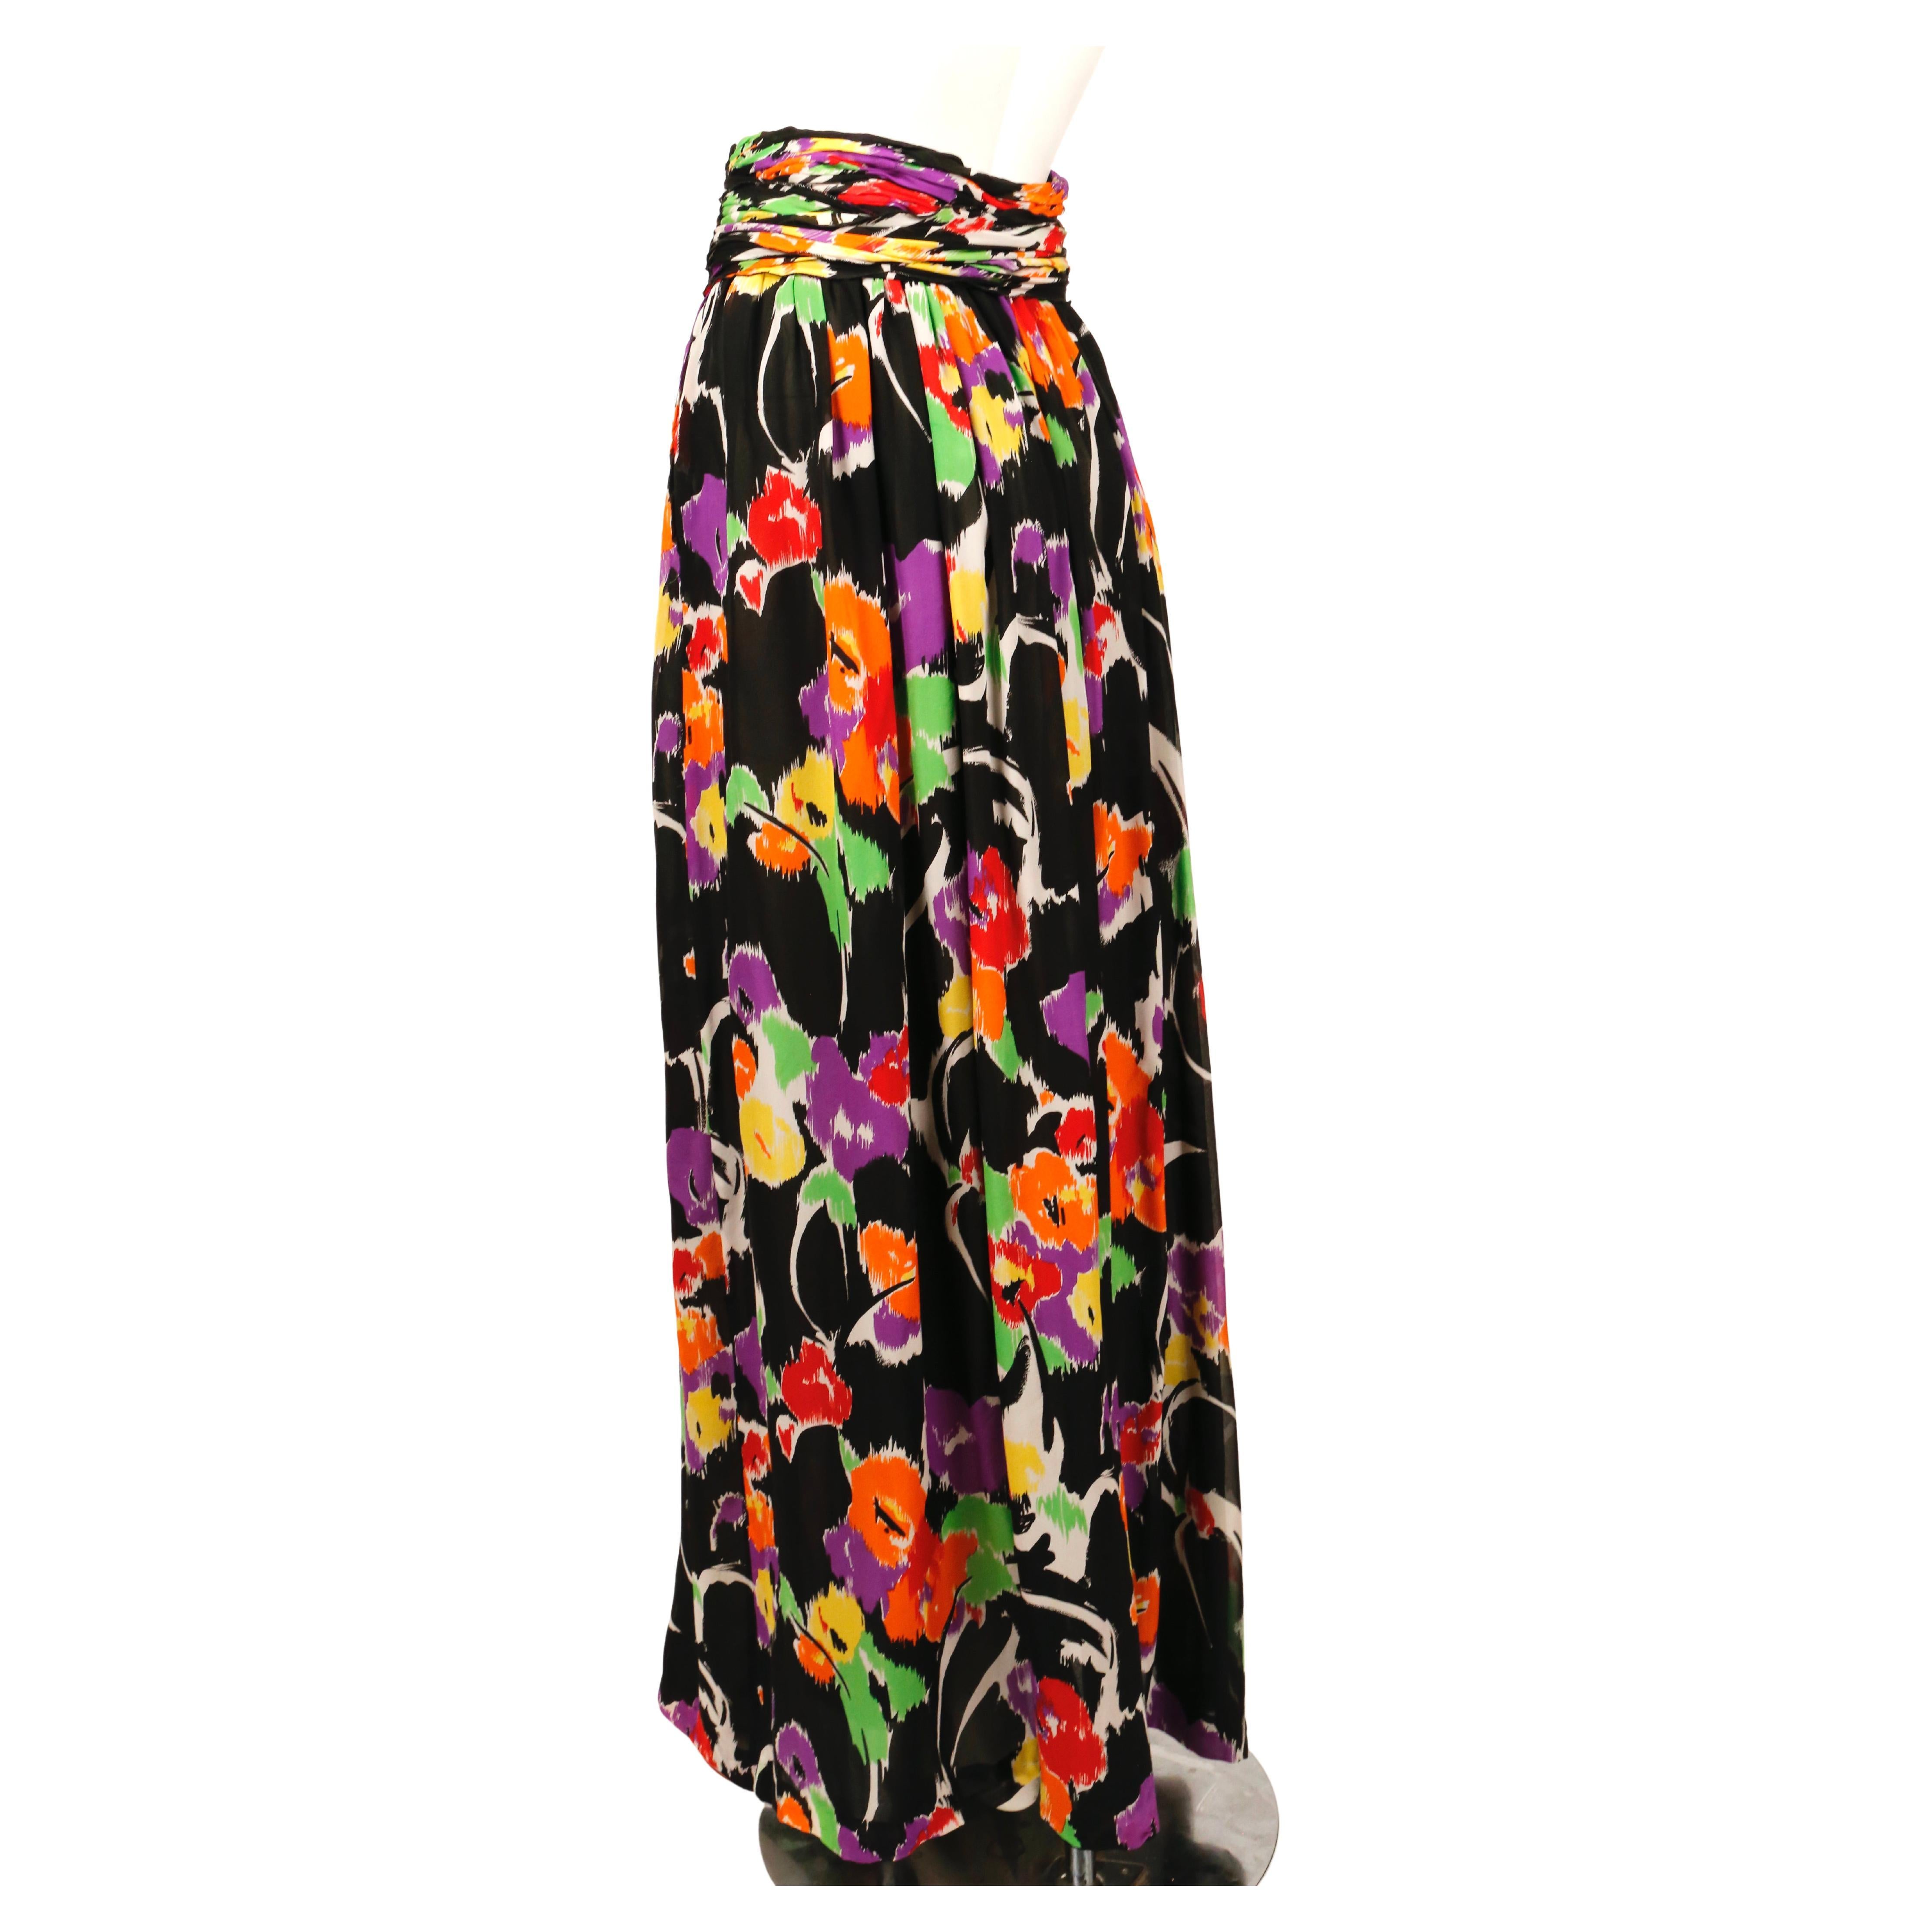 Black 1980's VALENTINO floral printed silk mousseline maxi skirt